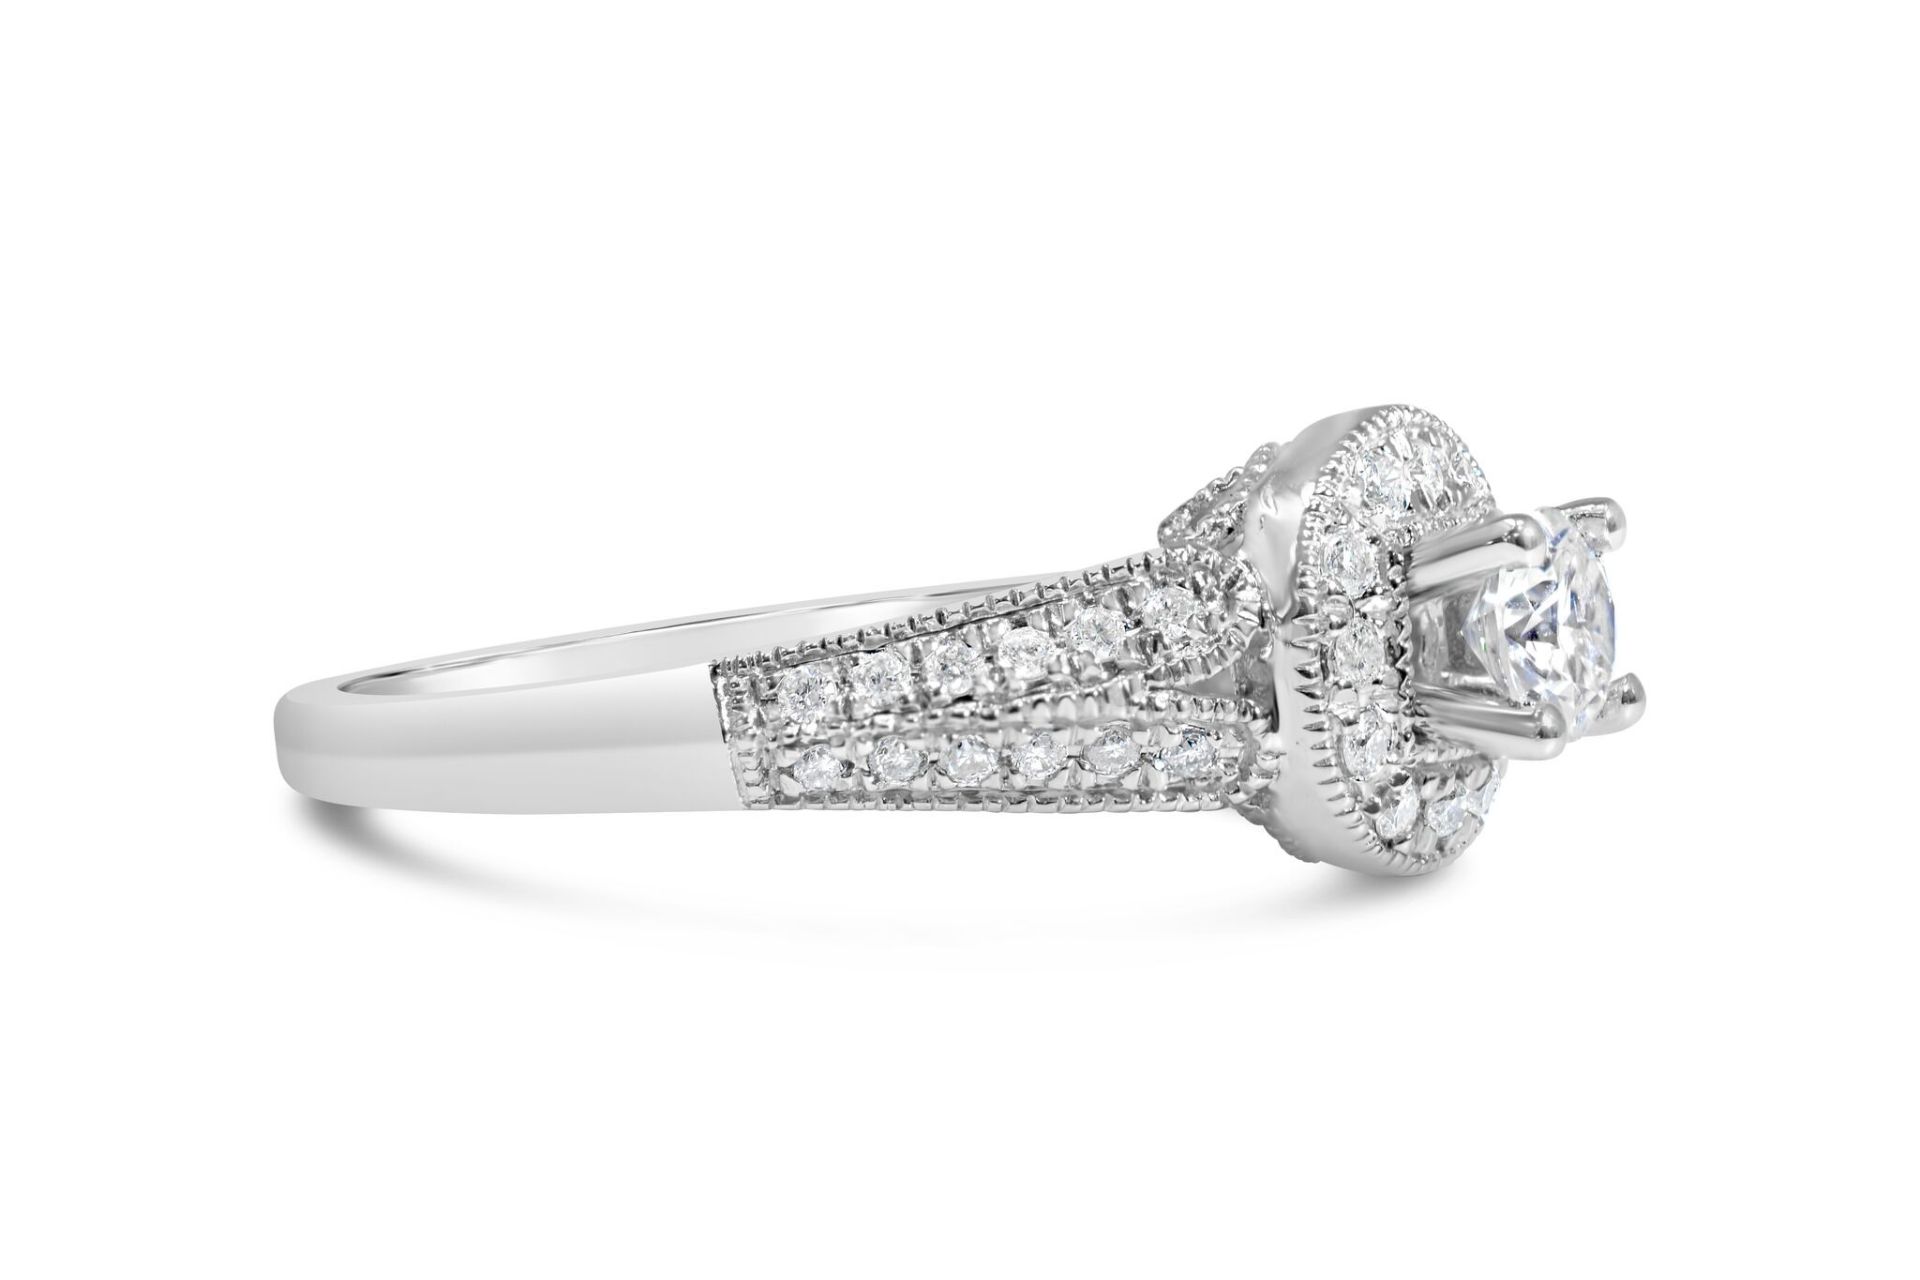 Bridal Set Of Diamond Engagement and Wedding Rings with over 50 diamonds in total, Metal 9ct White - Image 3 of 4